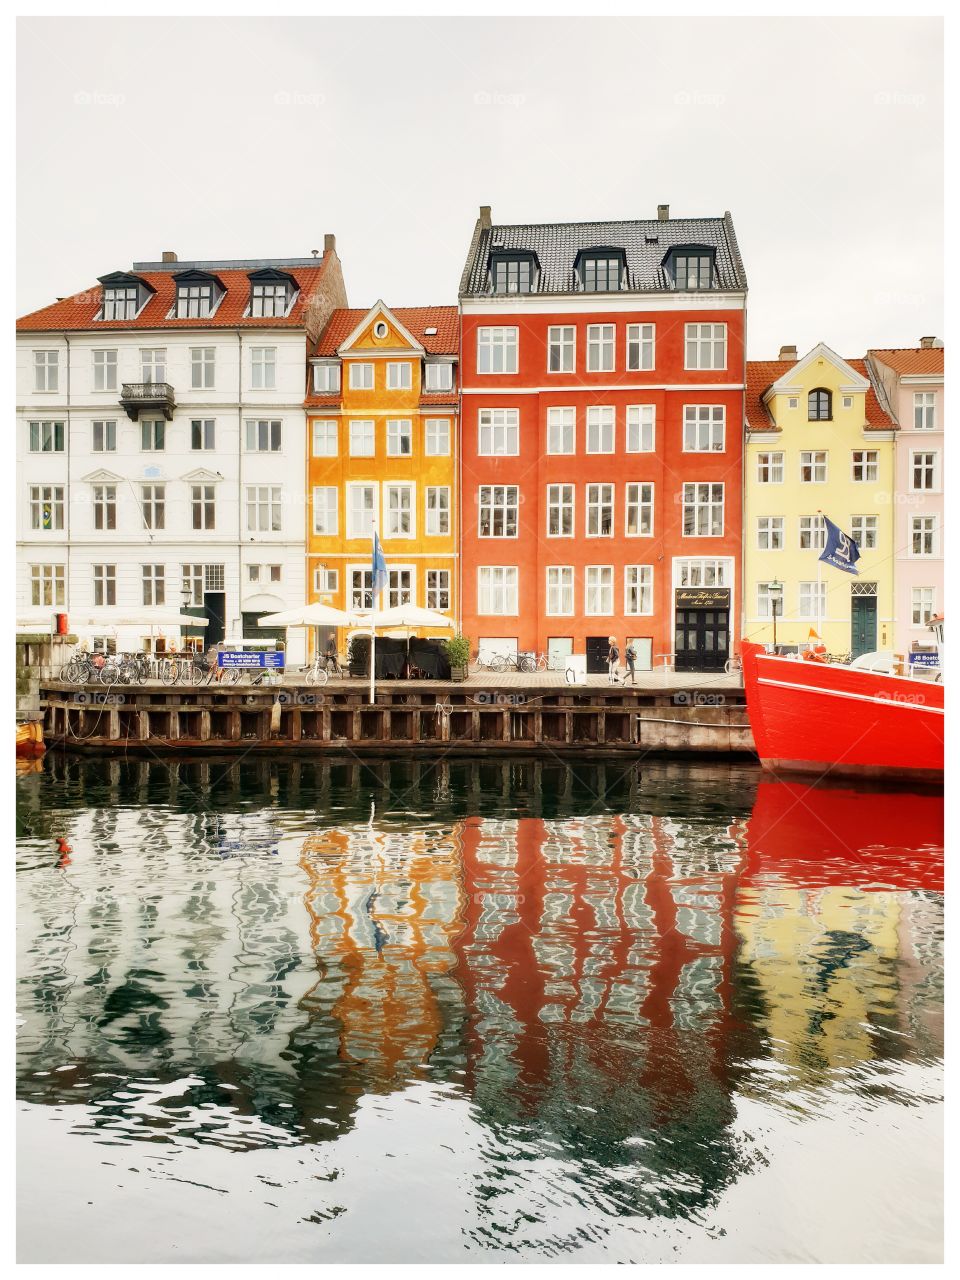 Nyhavn in Kopenhagen was beautiful to me. The colors and reflection in the water was mesmerising!